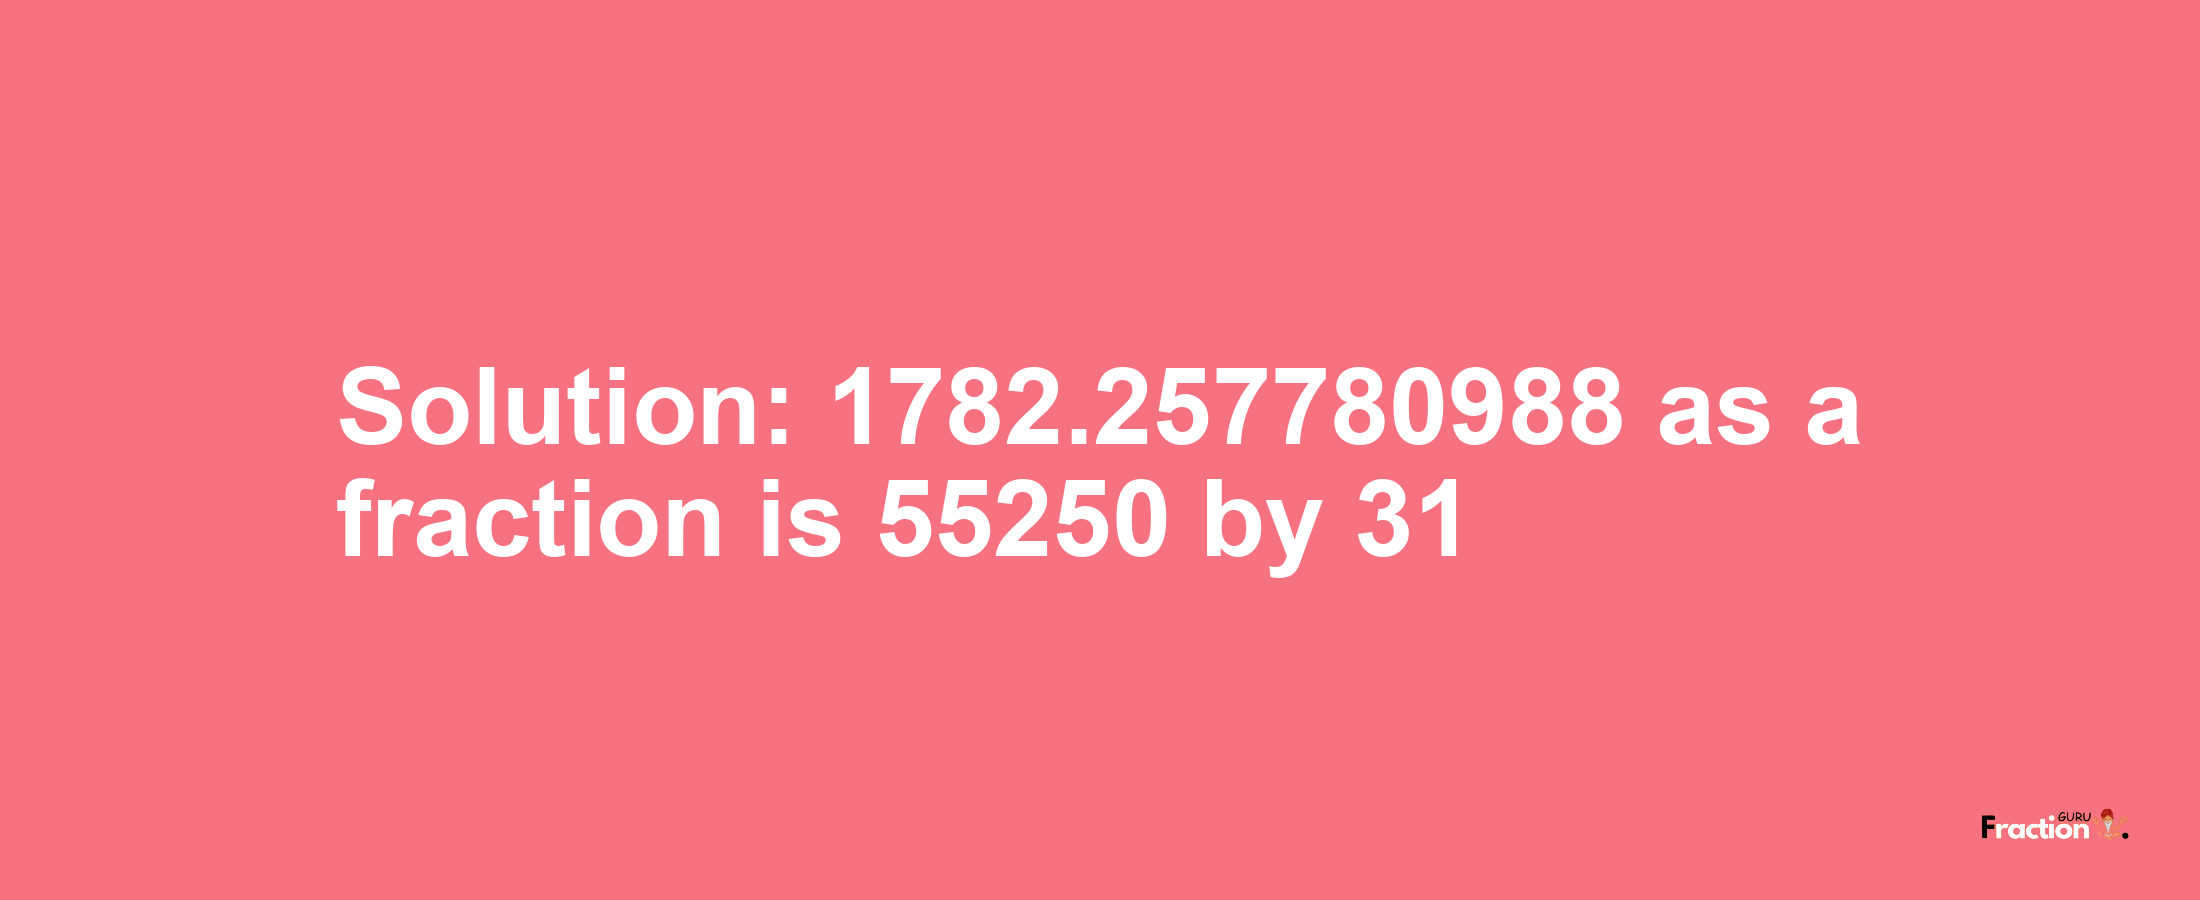 Solution:1782.257780988 as a fraction is 55250/31